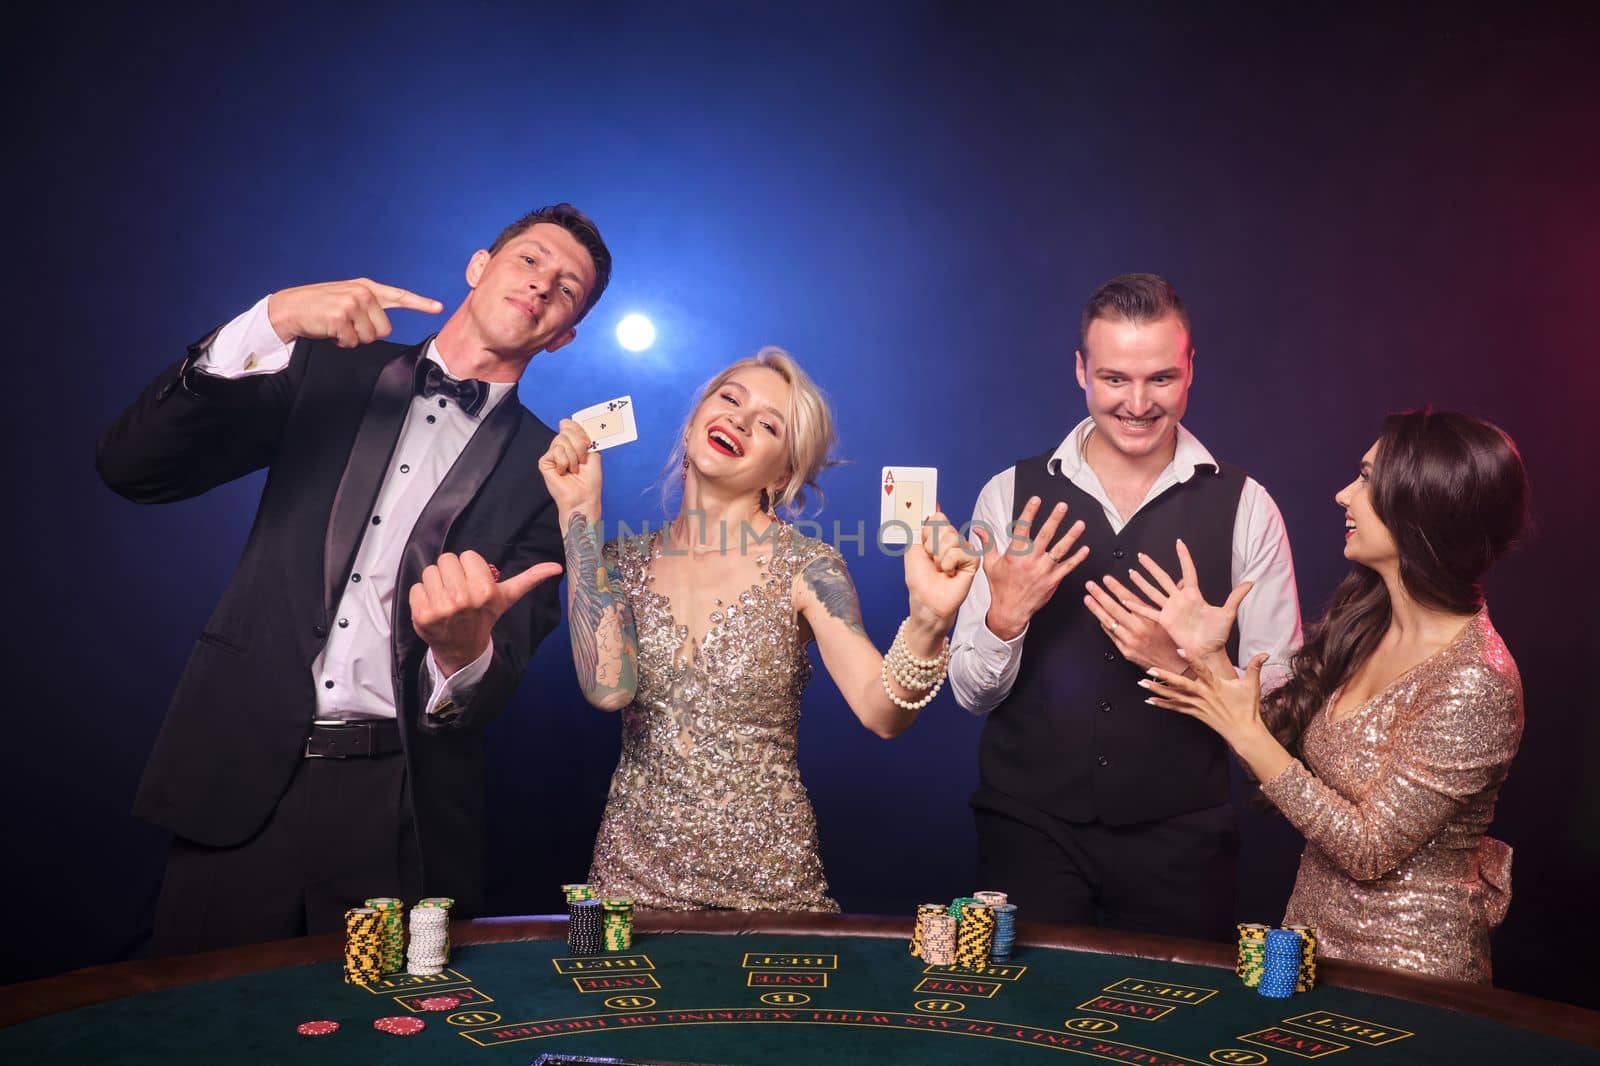 Group of an elegant rich buddies are playing poker at casino. Youth are making bets waiting for a big win. They are looking excited standing at the table against a red and blue backlights on black background. Risky gambling entertainment.